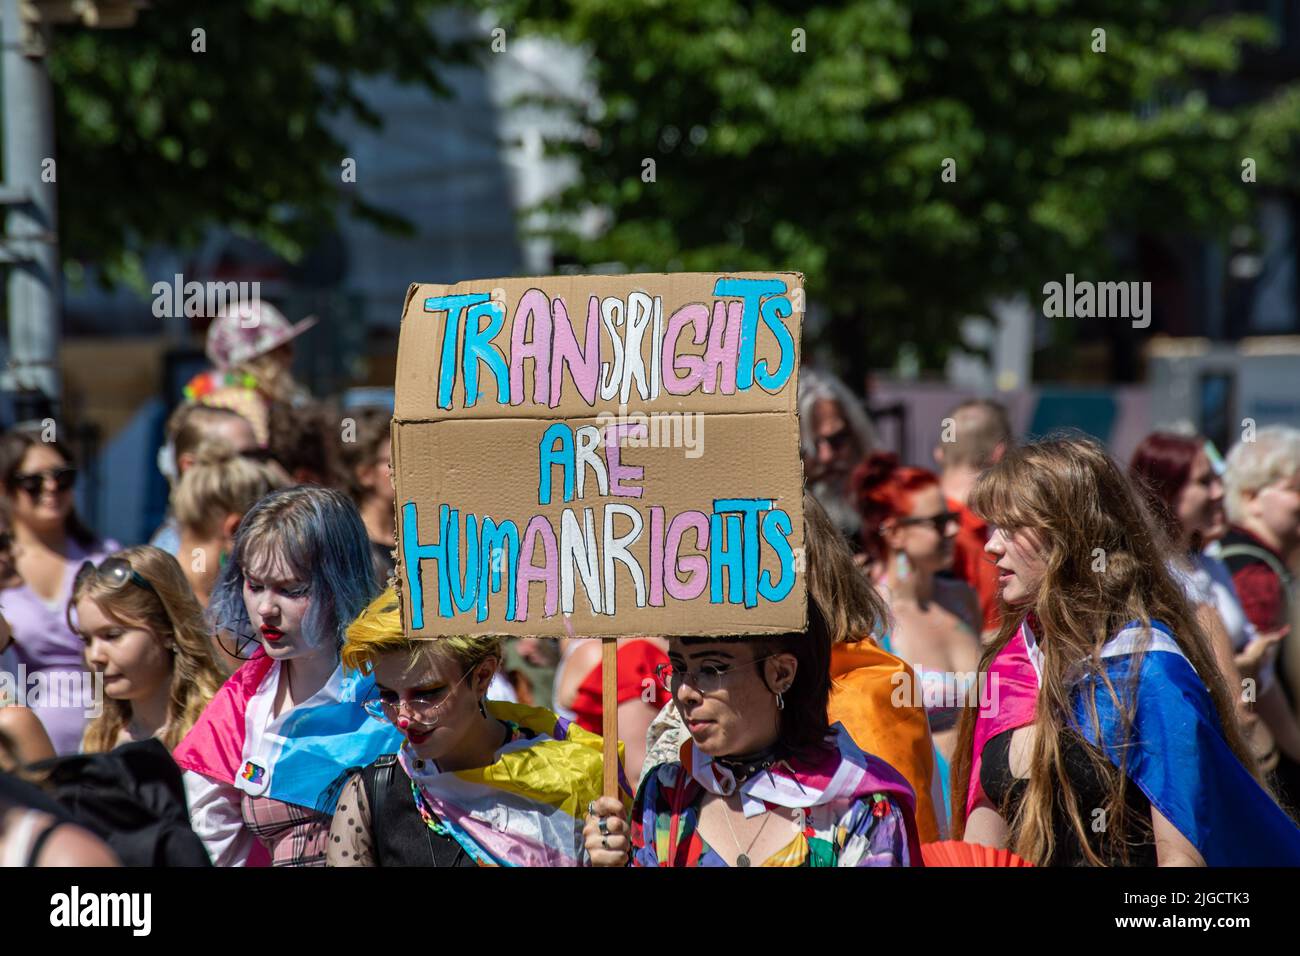 Trans rights are human rights. A cardboard sign at Helsinki Pride 2022 Parade in Helsinki, Finland. Stock Photo